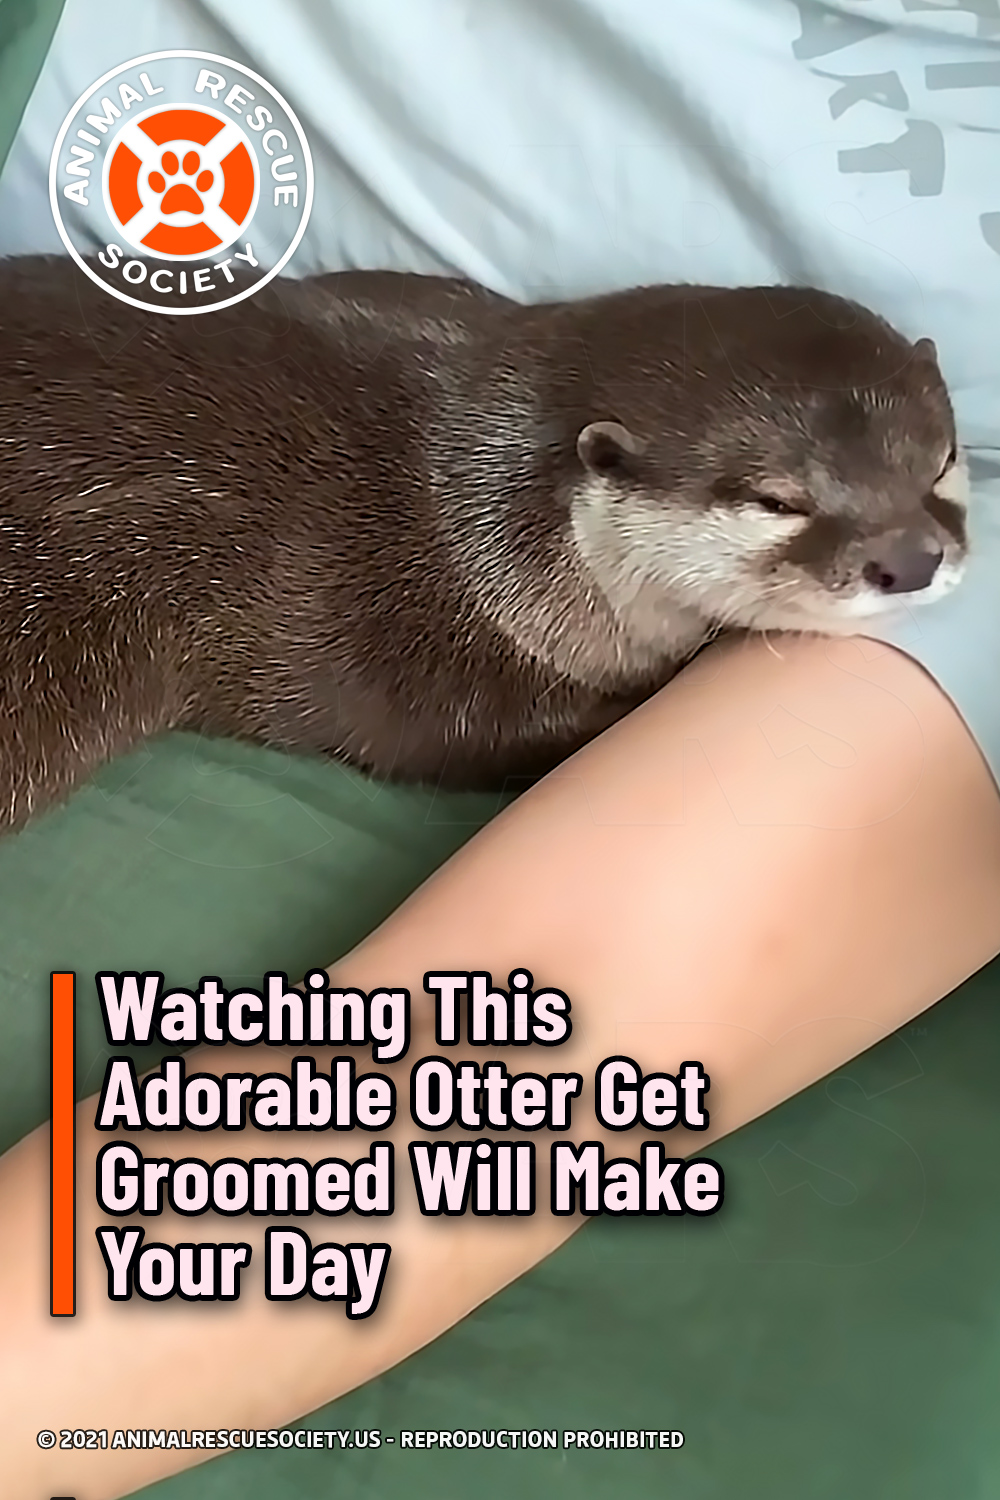 Watching This Adorable Otter Get Groomed Will Make Your Day